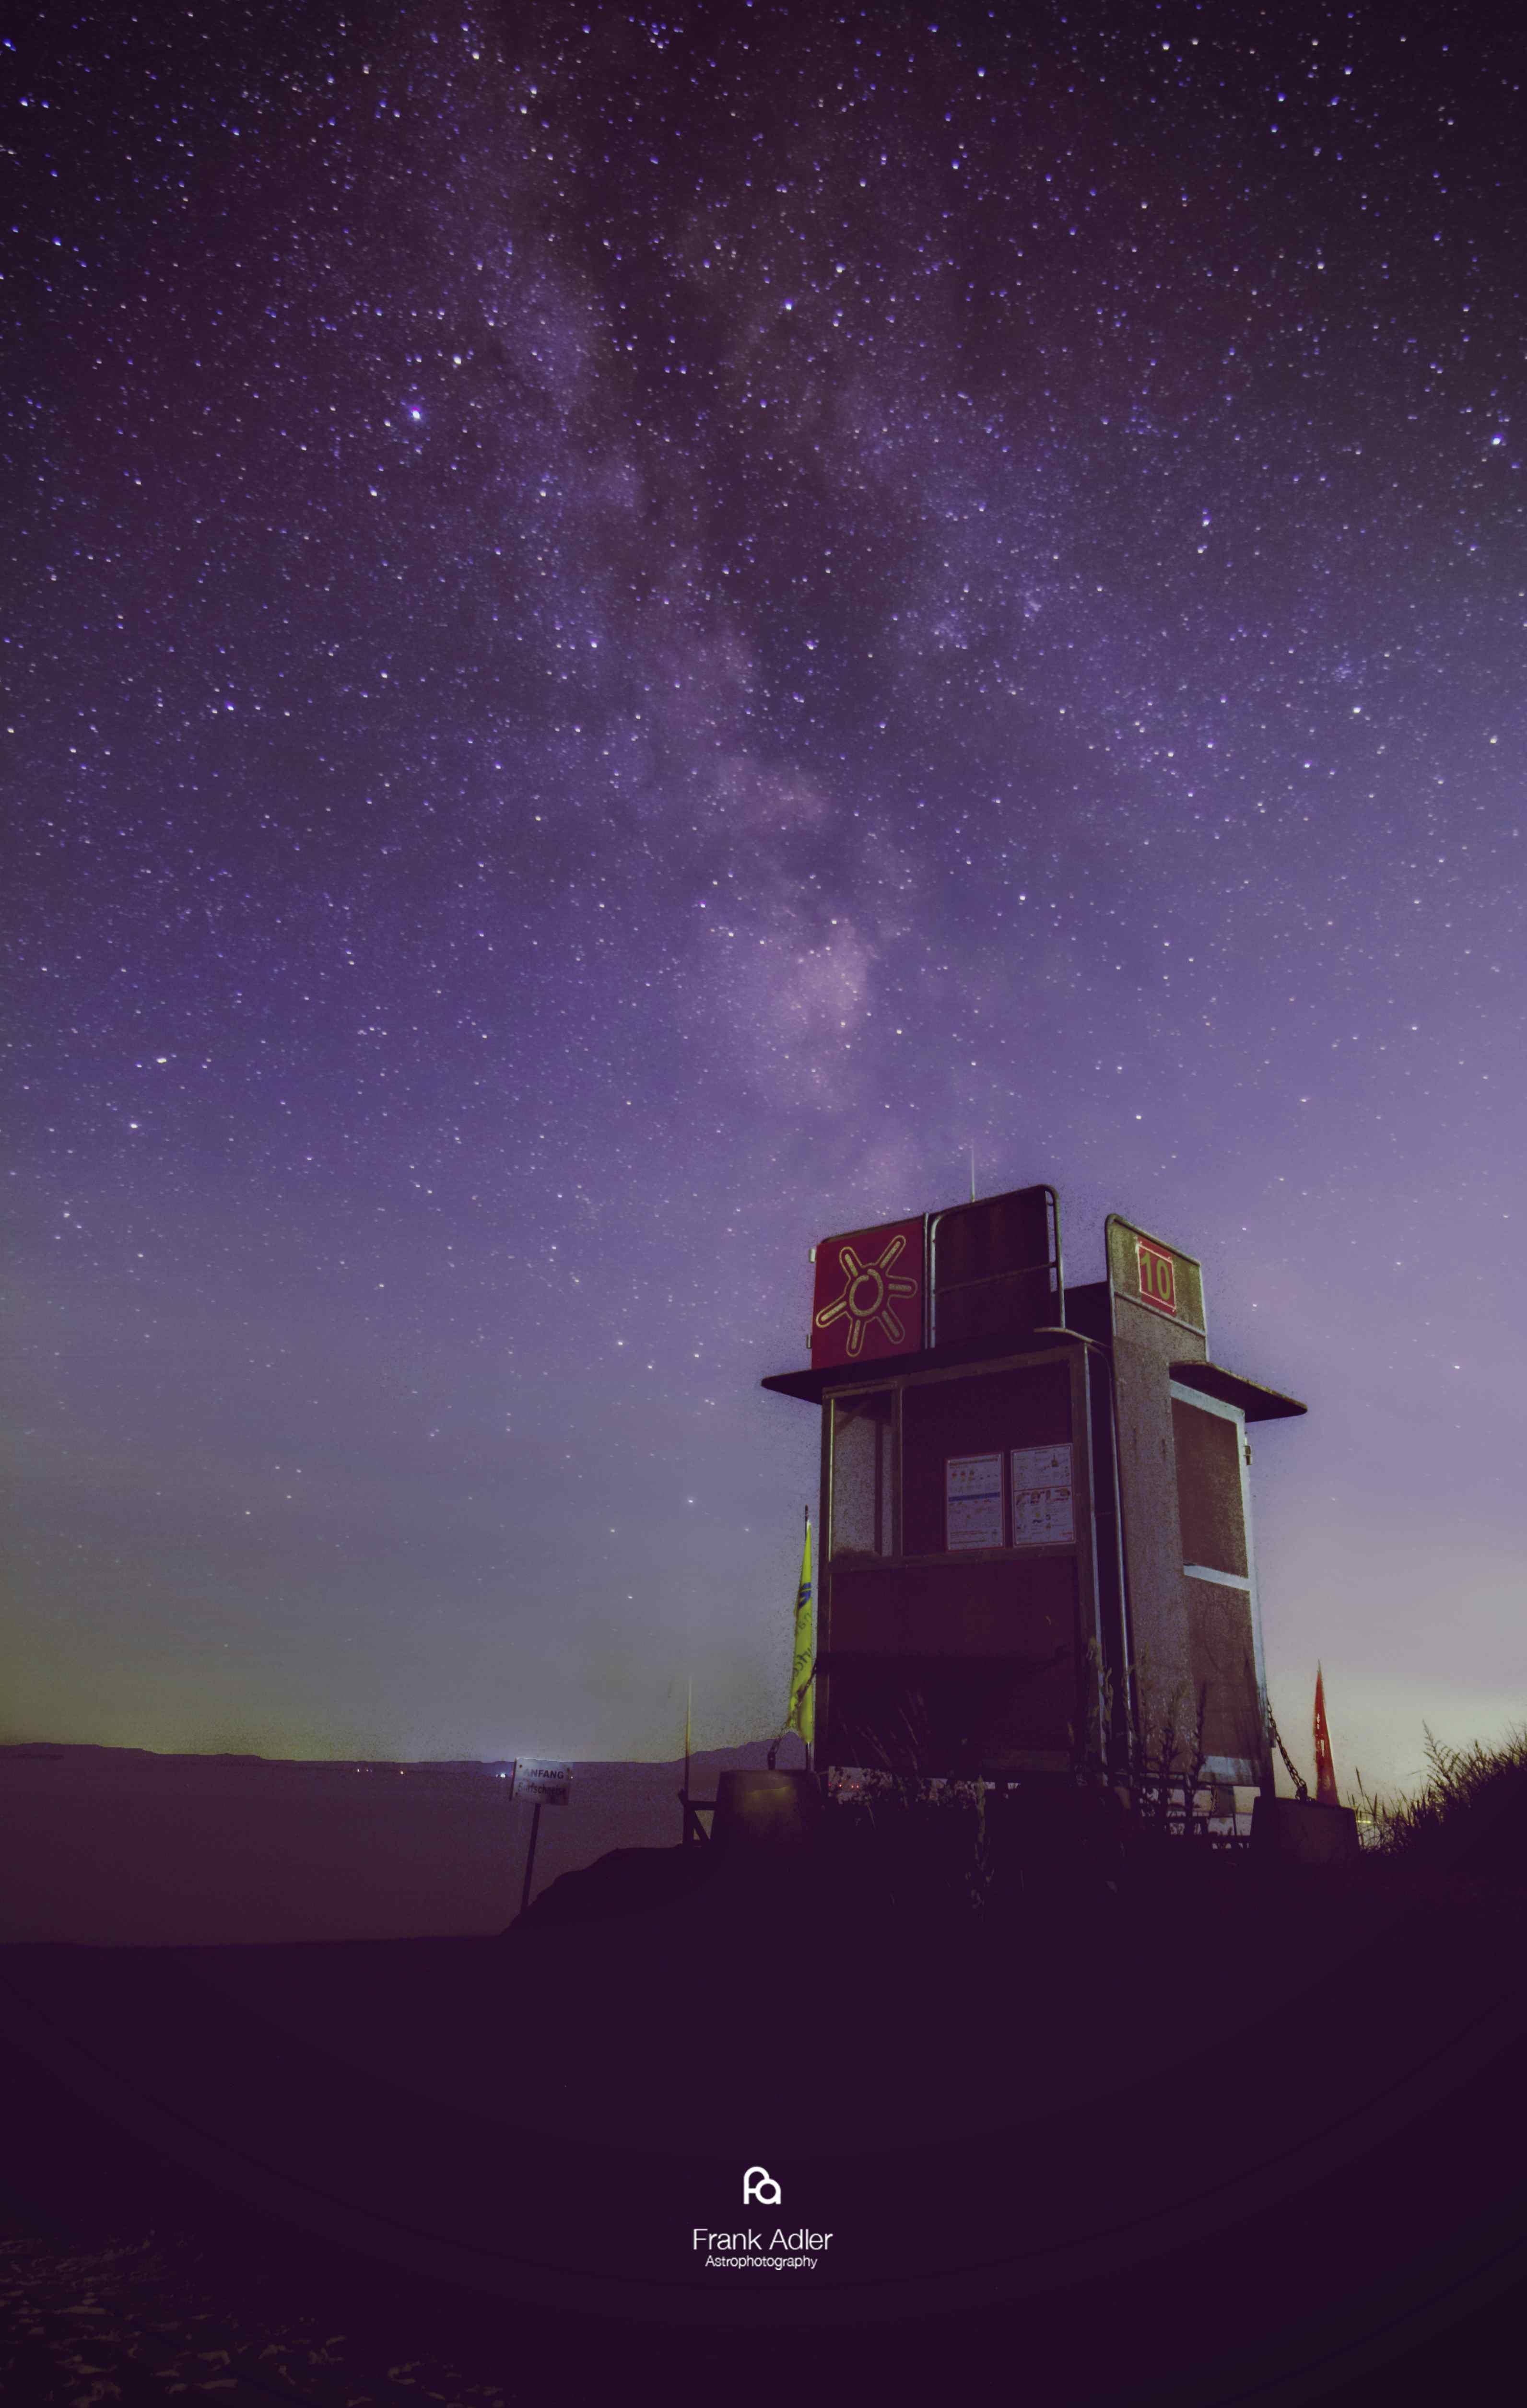 Milky Way above a lifeguard tower